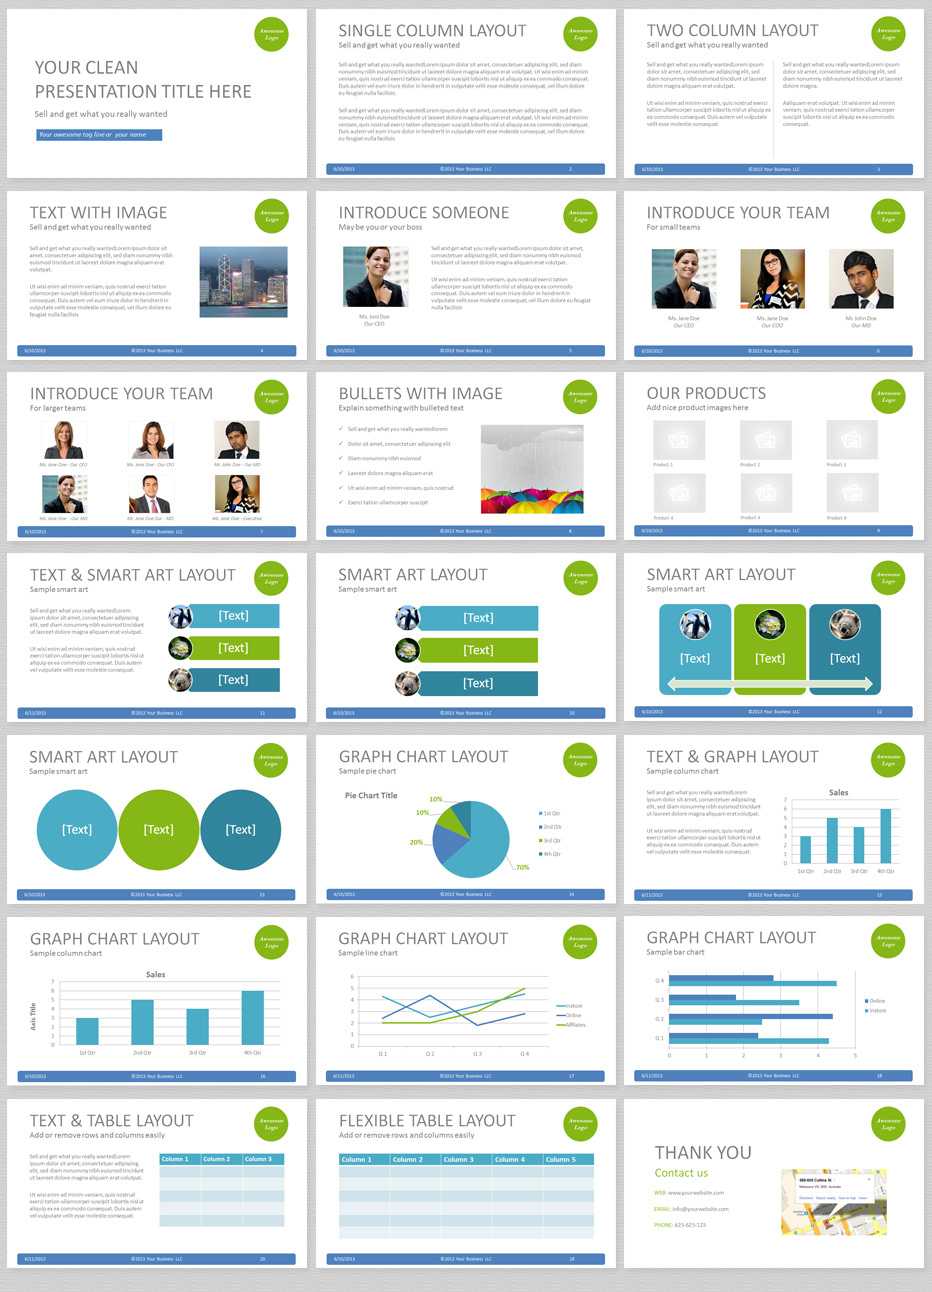 Powerpoint 2007 Template Free Download – Atlantaauctionco Pertaining To Powerpoint 2007 Template Free Download